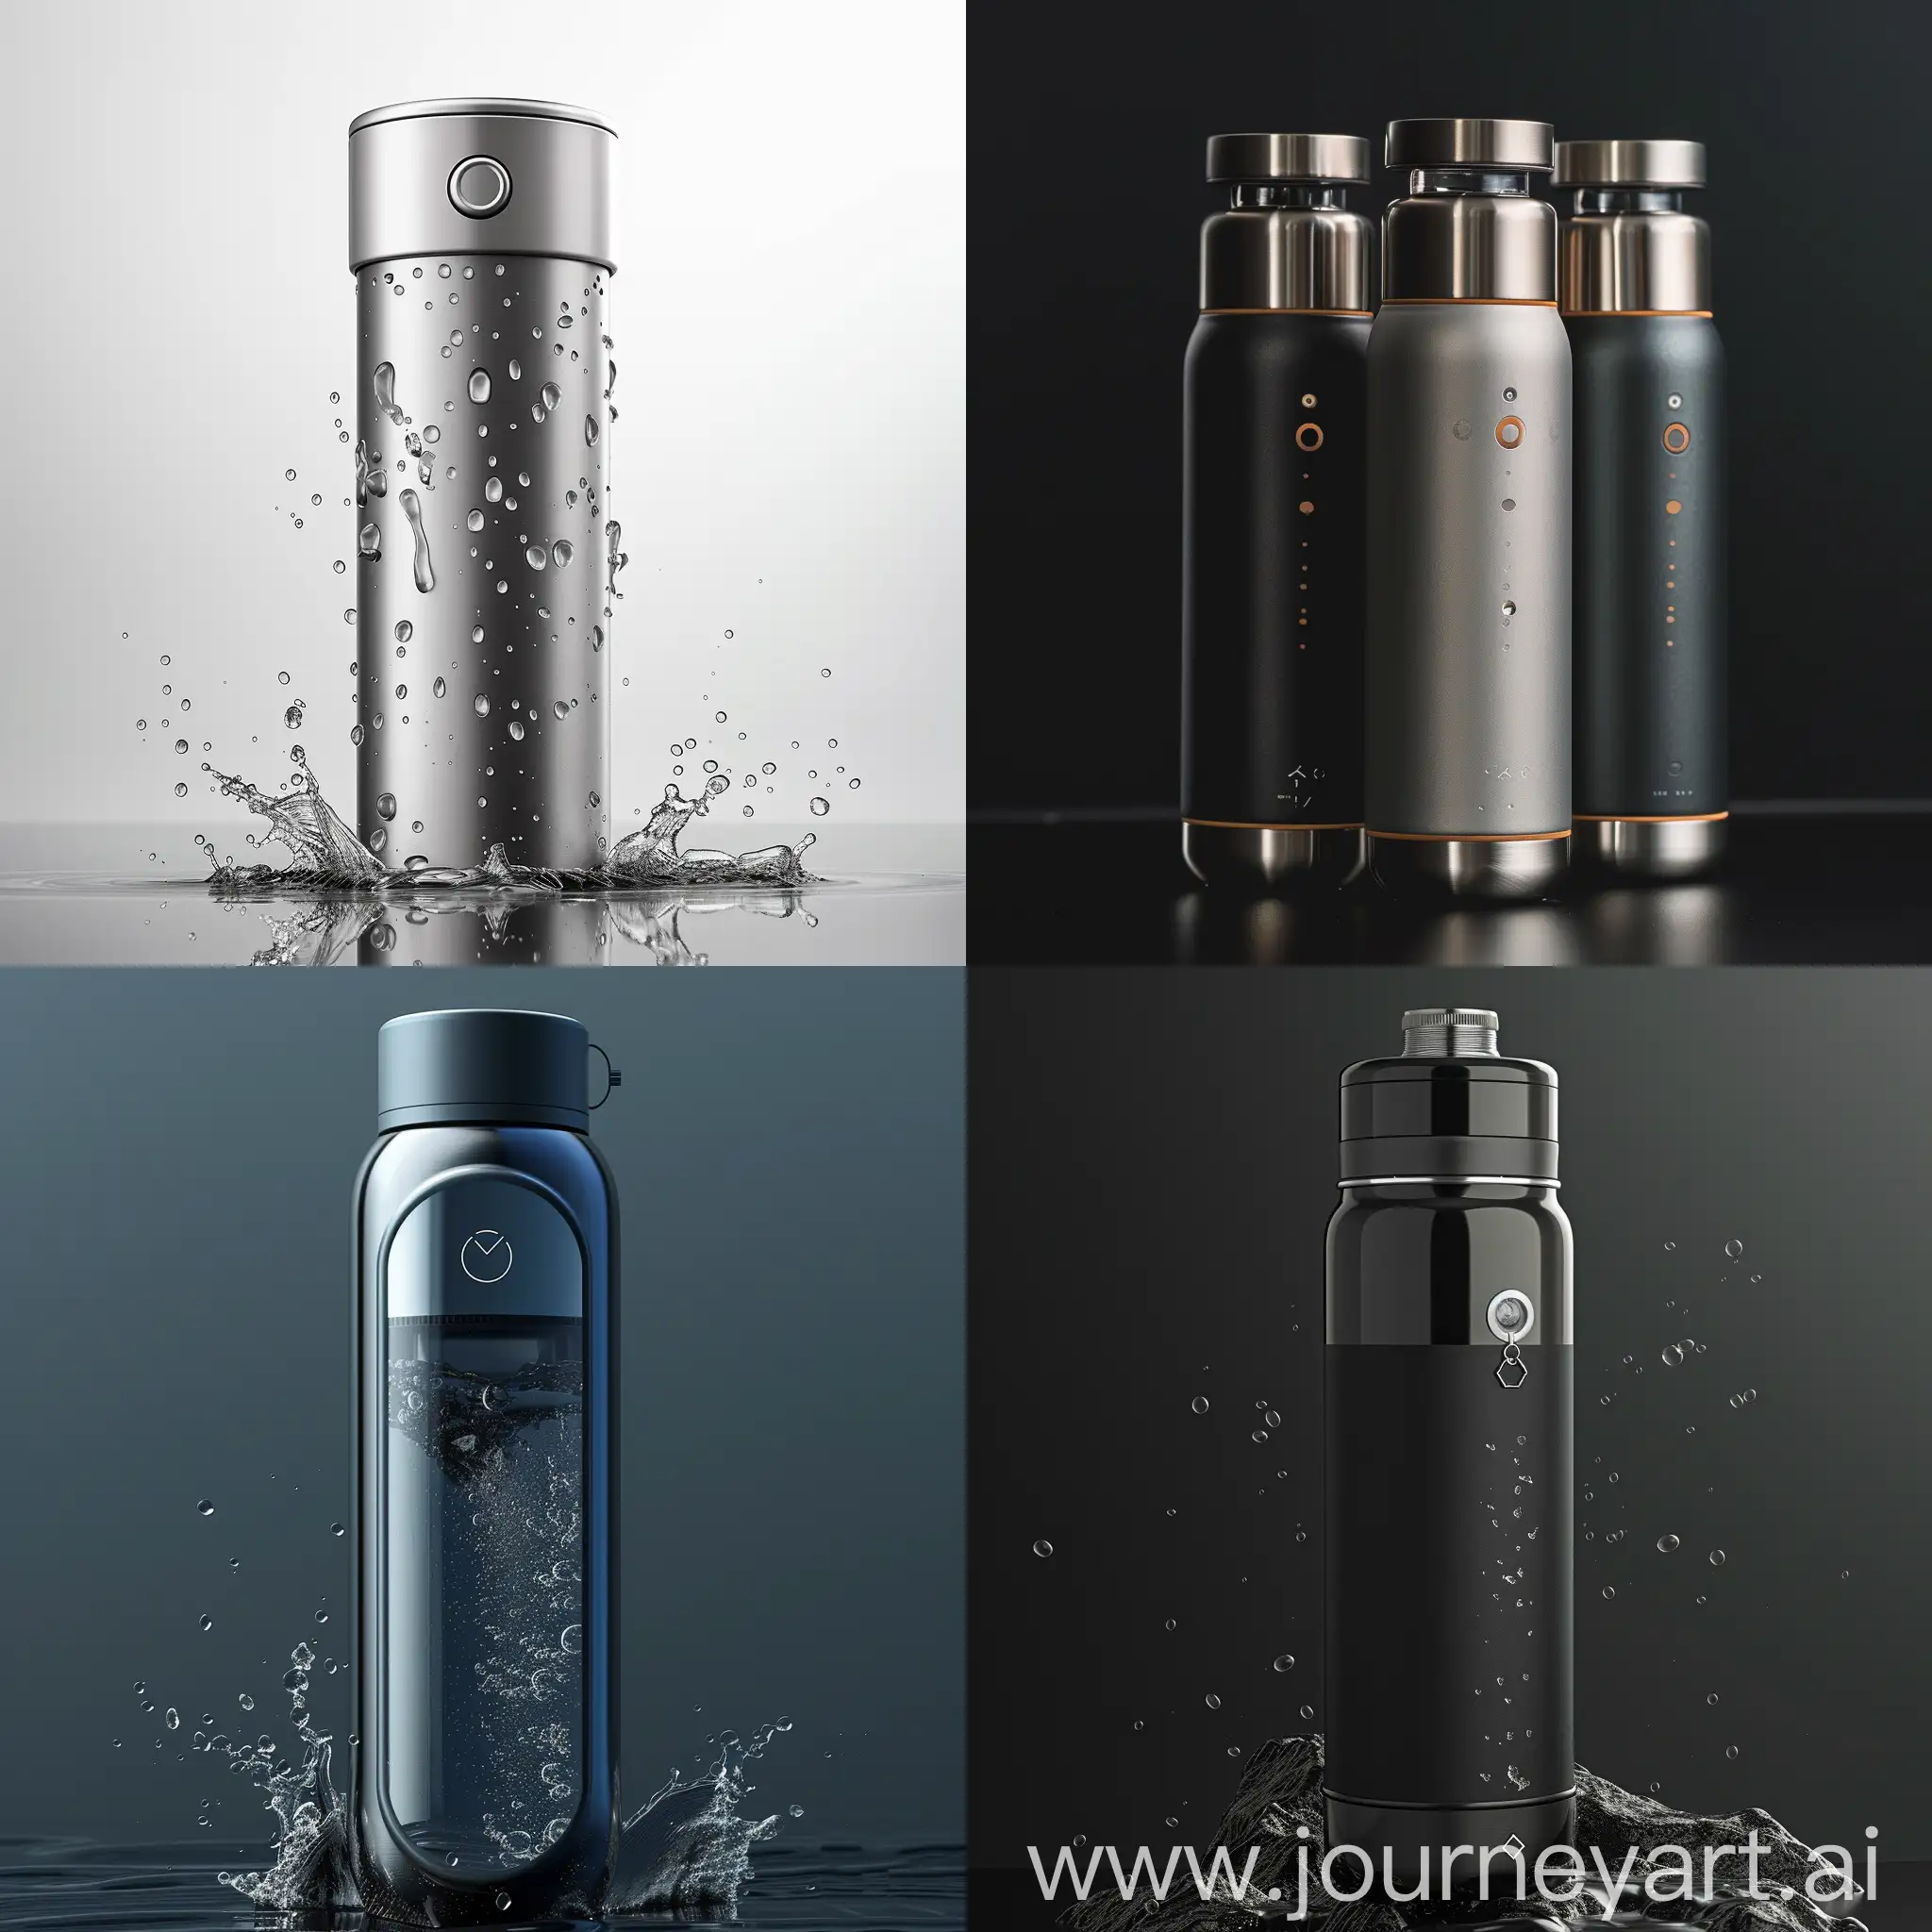 Generate an image of a portable water bottle crafted from premium aluminum with built-in water purification technology. The design should target environmentally conscious and health-oriented young adults aged 16-25. Emphasize the exclusive and sustainable nature of the product, showcasing its unique thermos effect. Consider incorporating elements that highlight the premium pricing strategy and align with the target demographic's focus on sustainability, fitness, and well-being. The image should convey a sense of quality, distinctiveness, and accessibility through various channels like social media, online platforms, and sports stores

